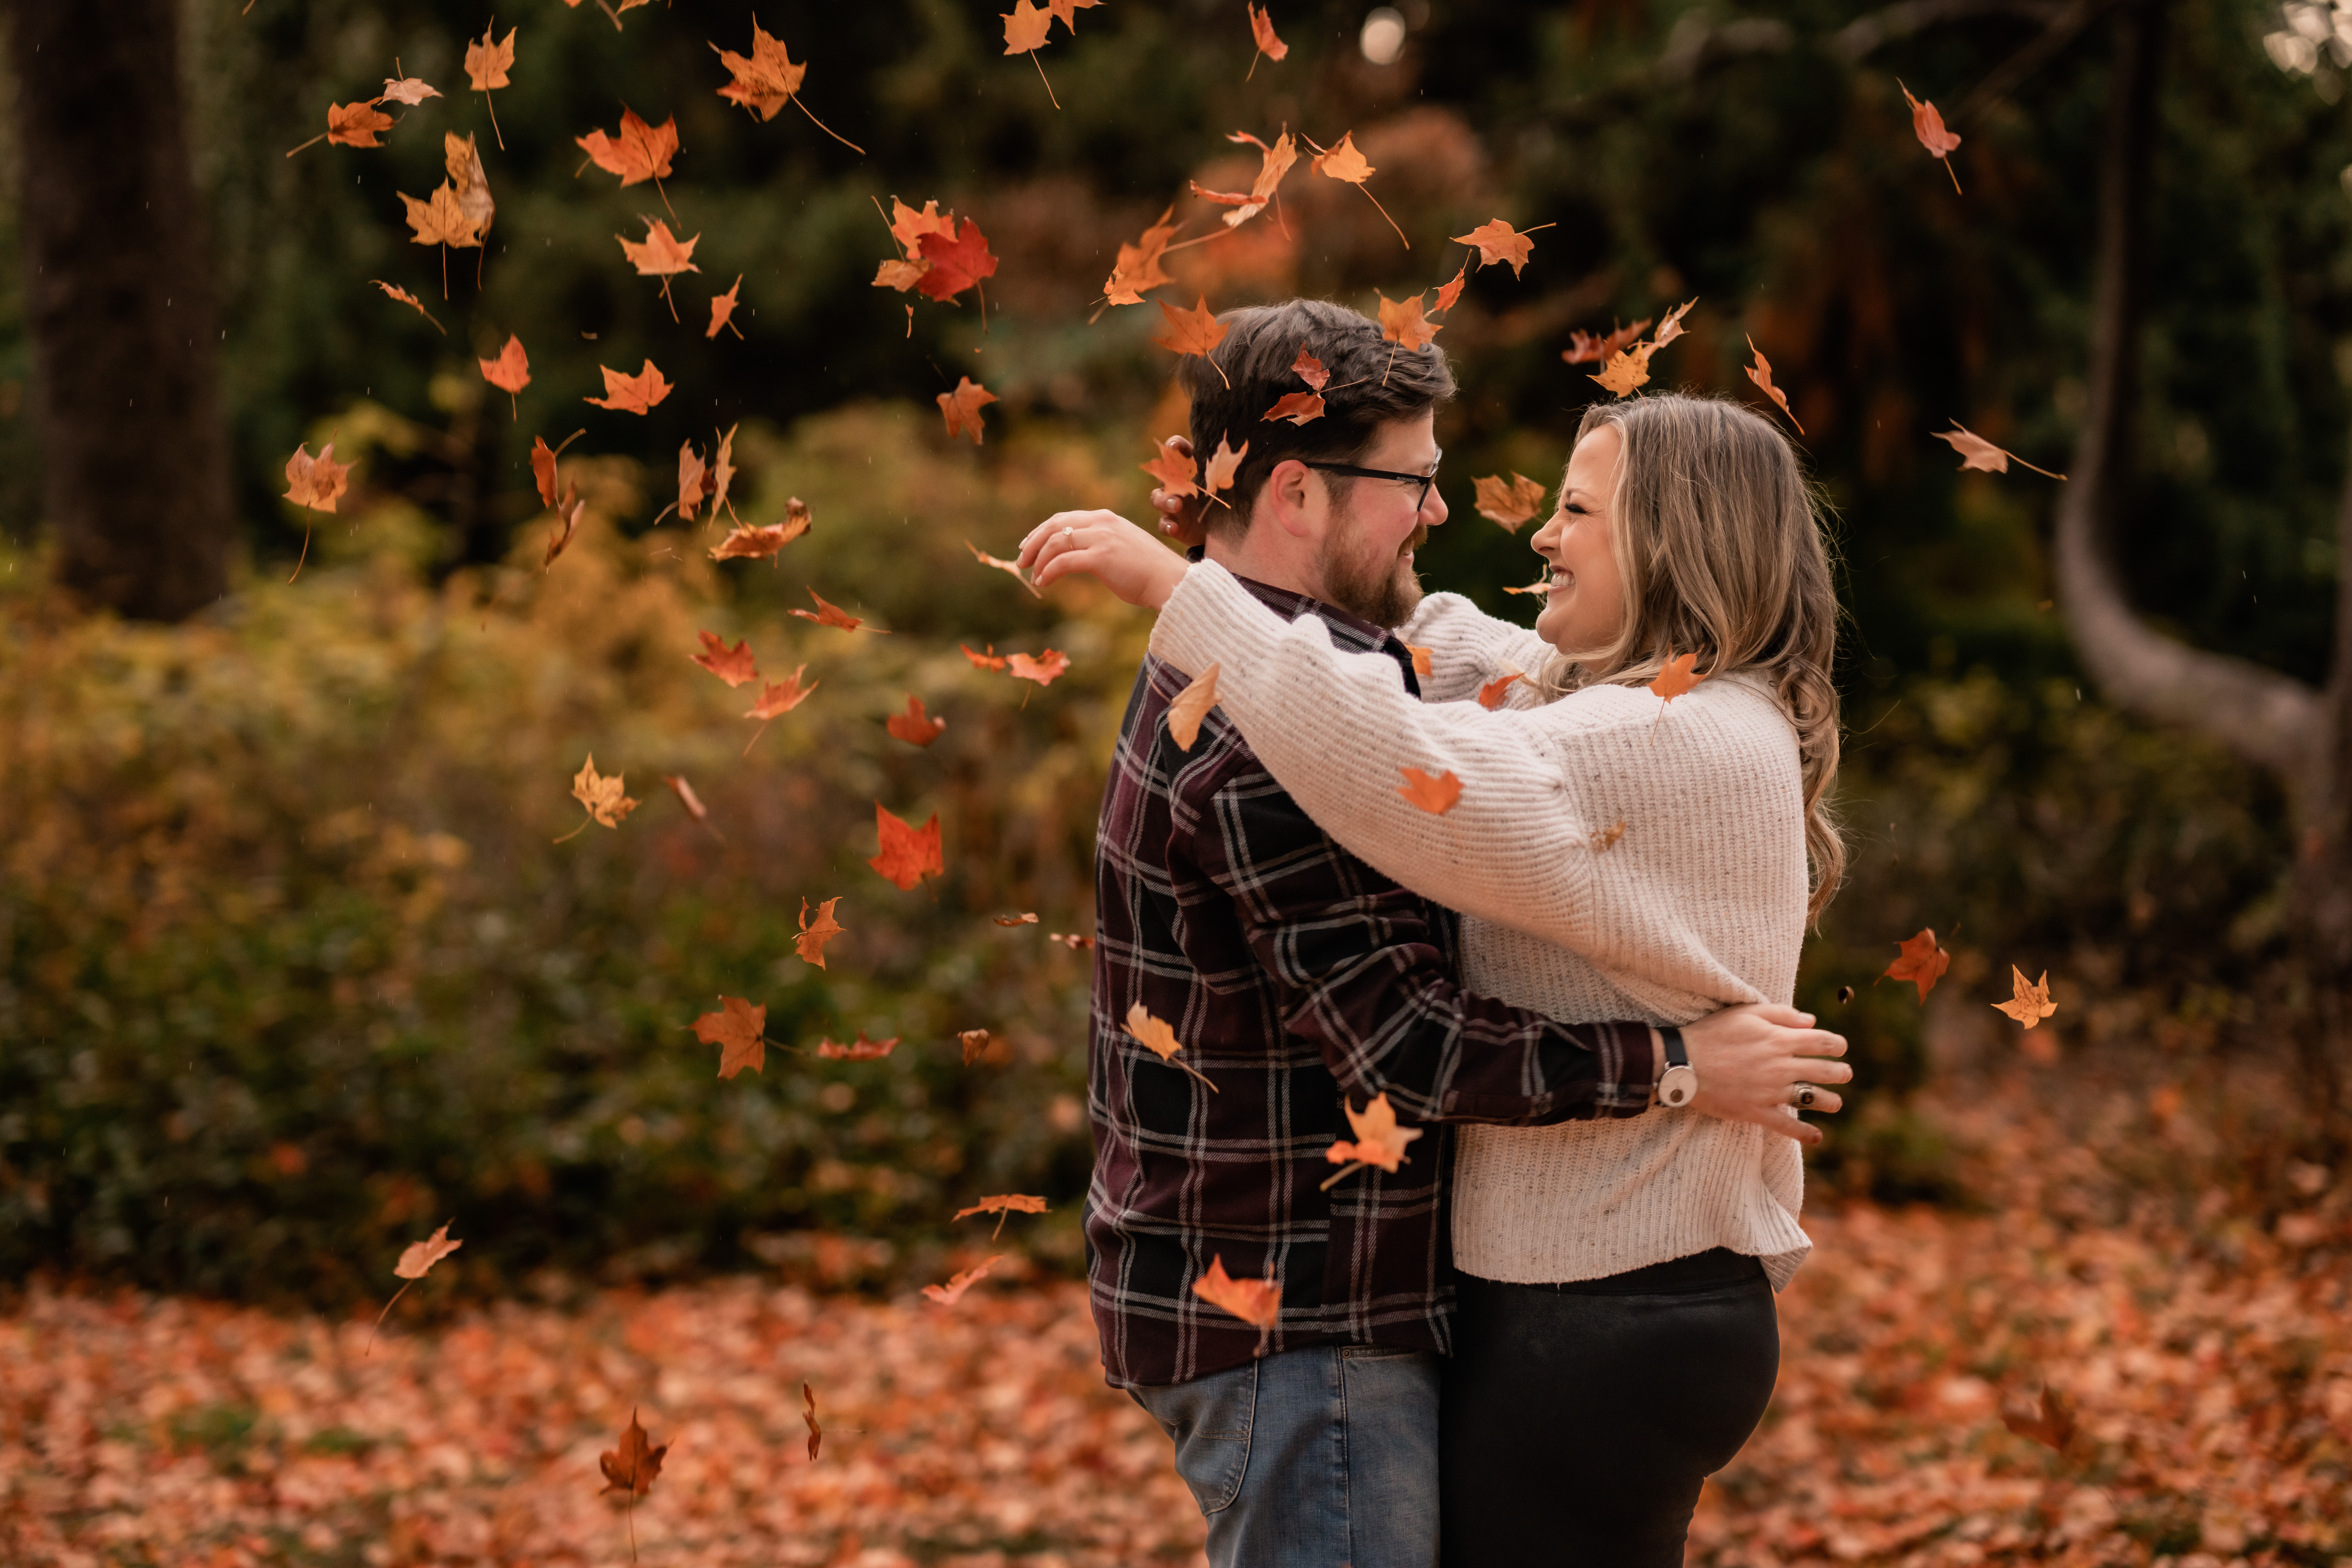 Skylands Manor Engagement Session, Skylands Manor Engagement Photographer, NJ Engagement Photographer, NJ Wedding Photographer, couple is smiling and hugging while the autumn leaves are falling around them 